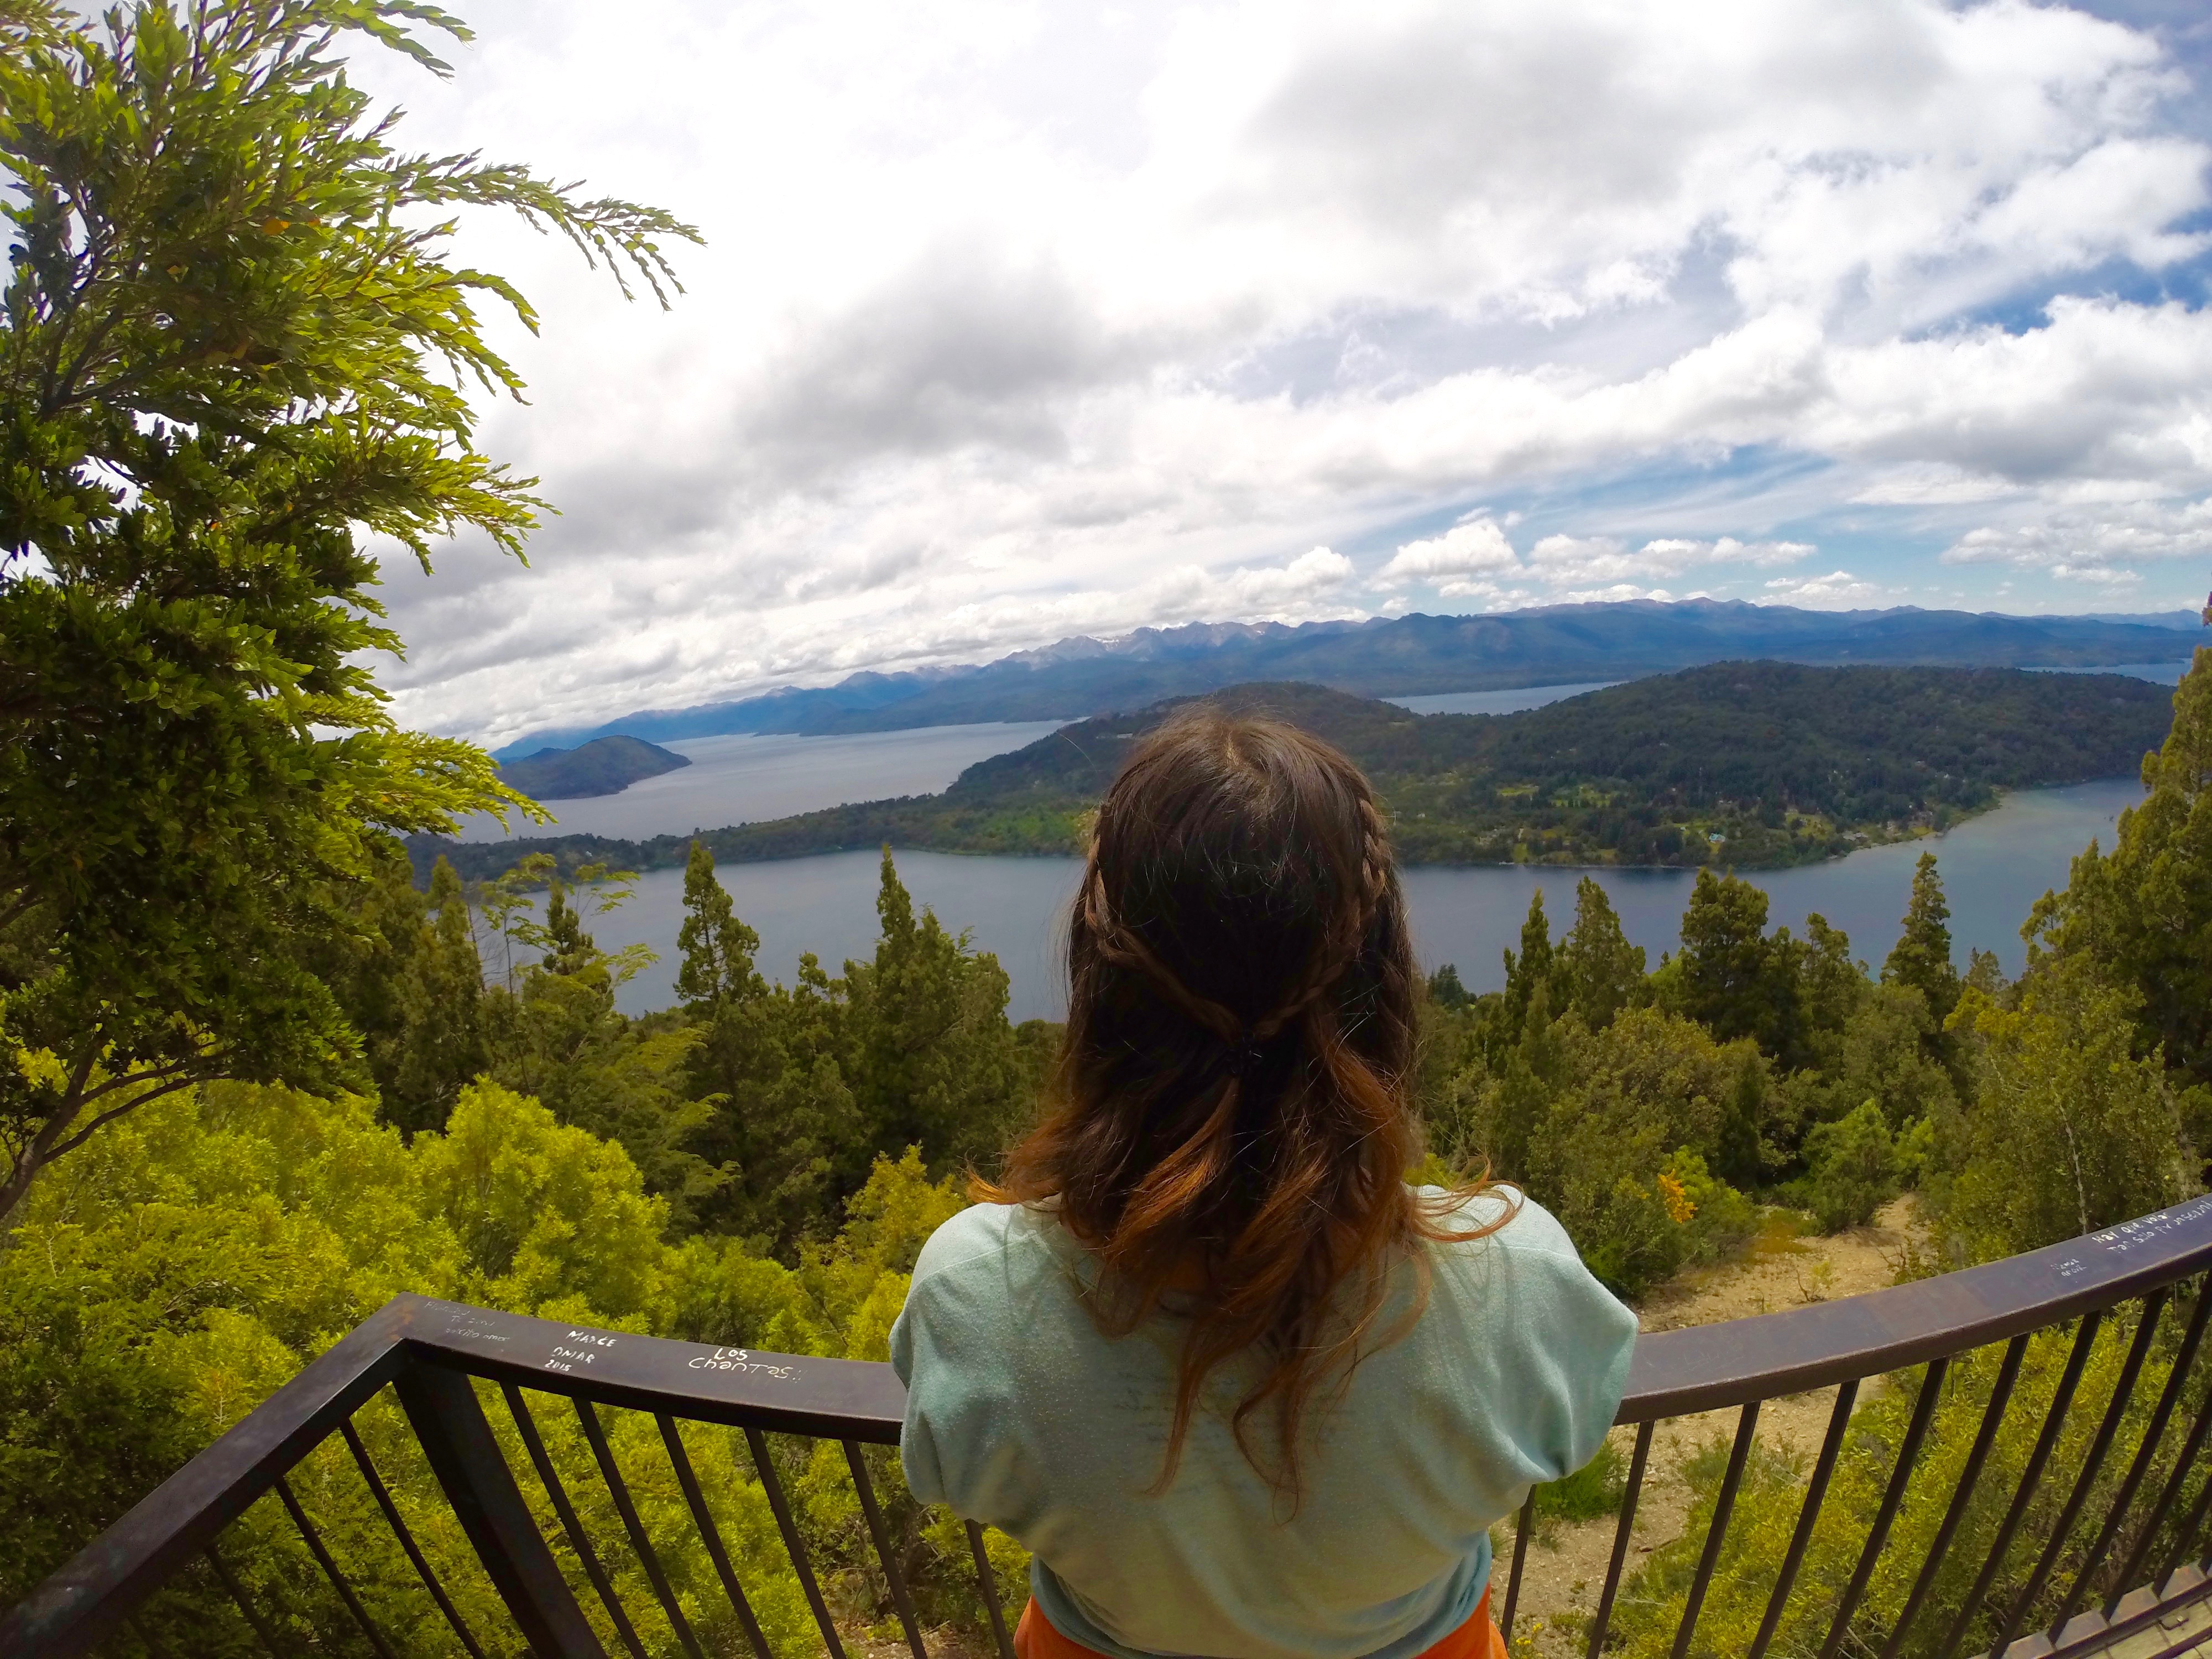 Taking it all in- Views of bariloche